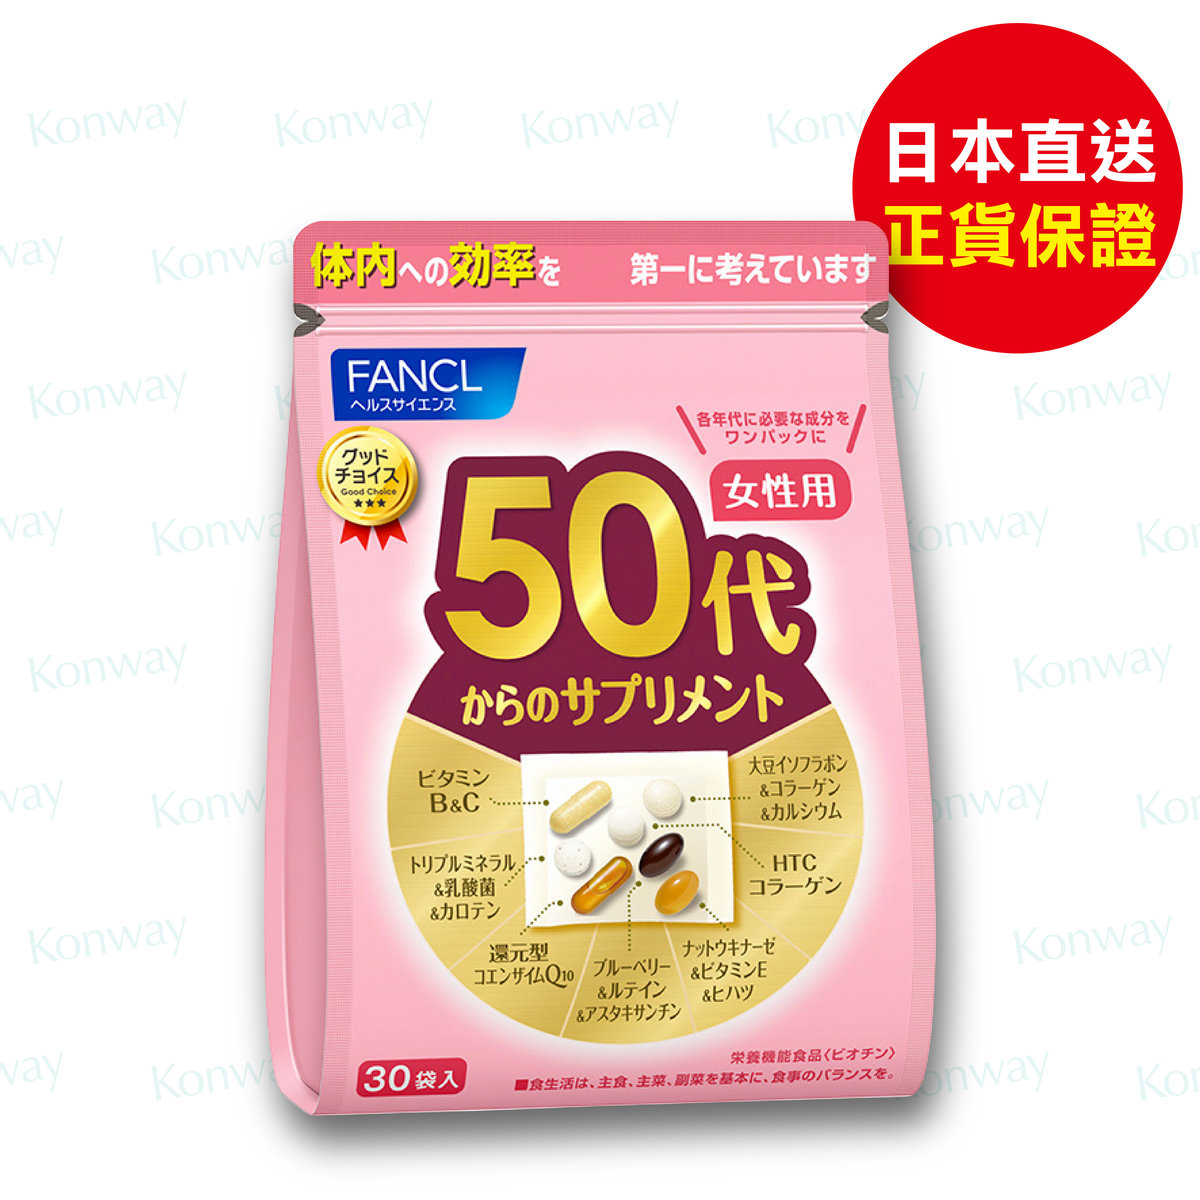 (New) Good Choice 50's Women Health Supplement (30 Bags) (Best Before:08/2025) Parallel Import